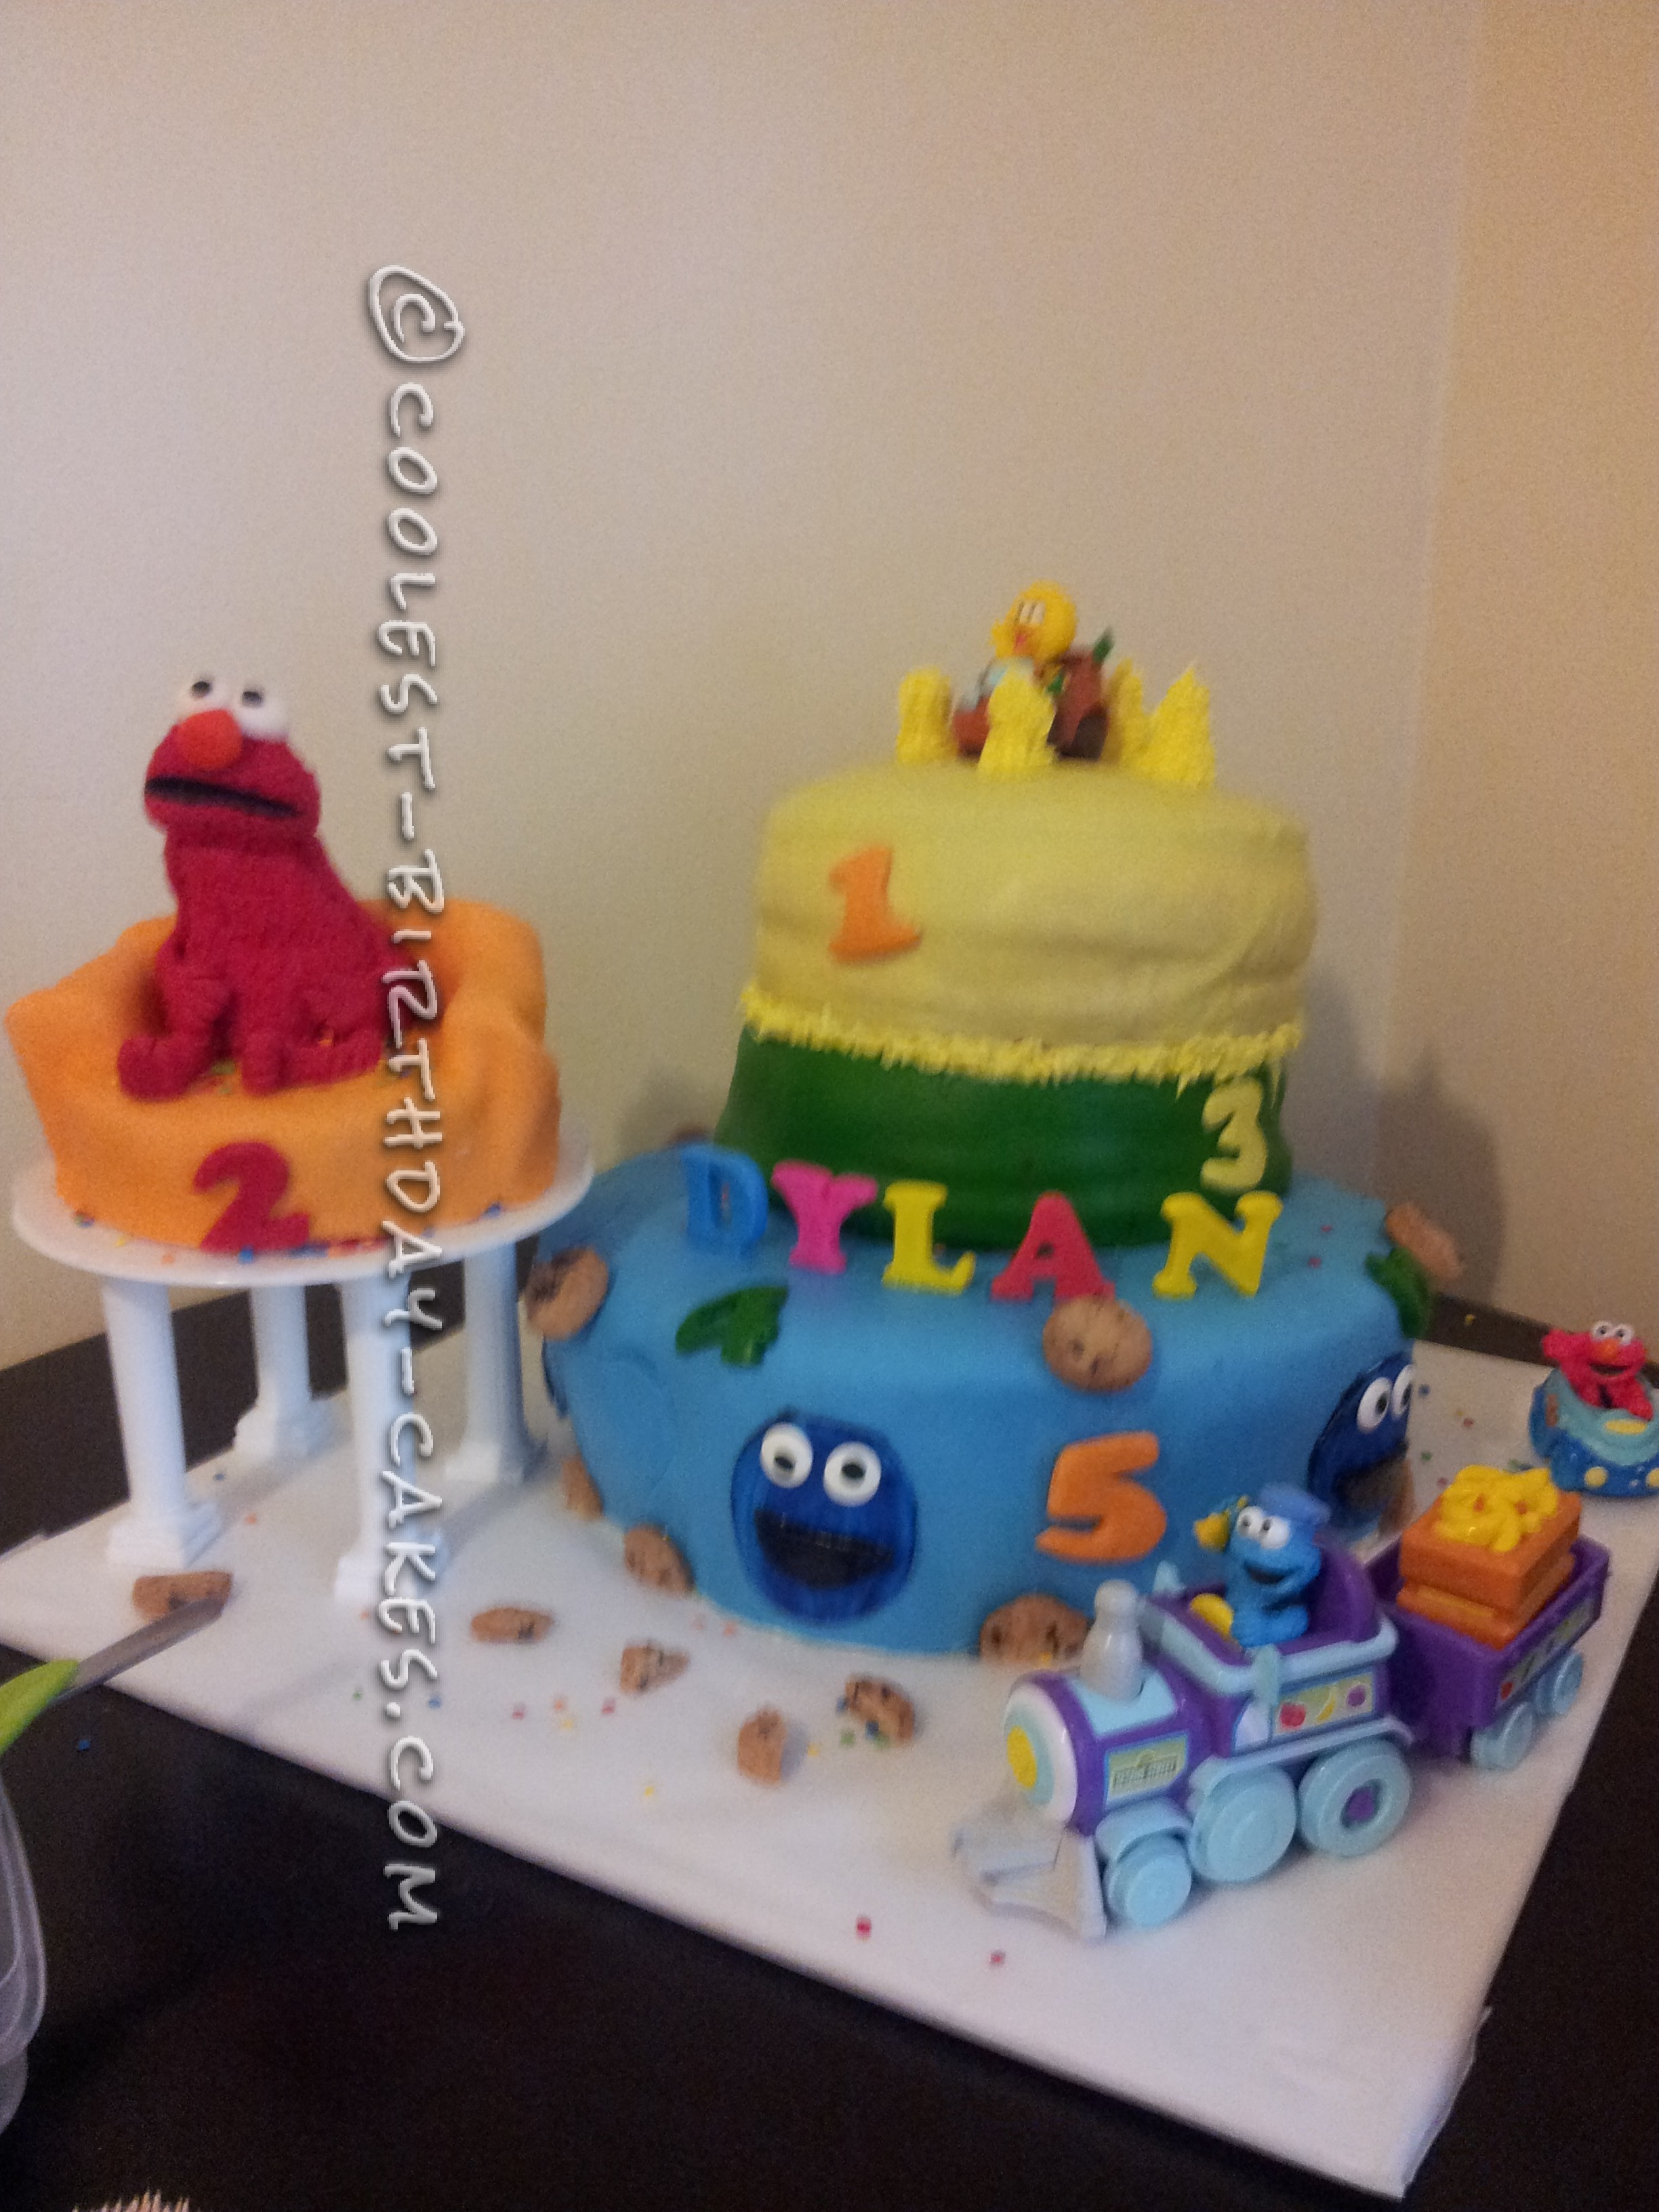 Awesome Sesame Street Birthday Cake for a 2 Year Old Boy